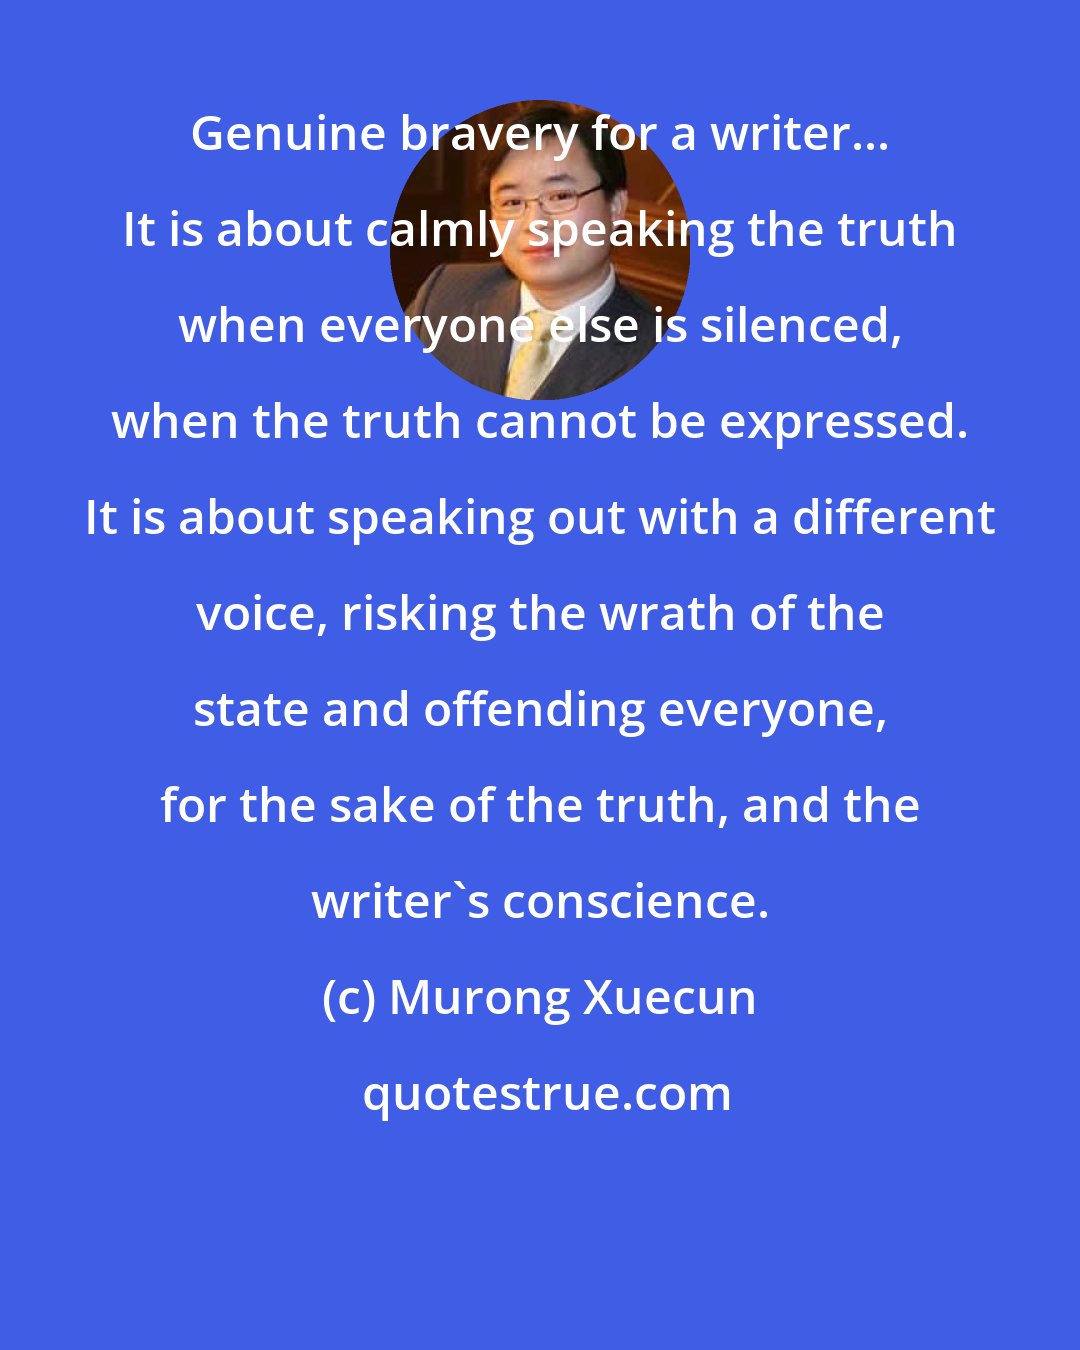 Murong Xuecun: Genuine bravery for a writer... It is about calmly speaking the truth when everyone else is silenced, when the truth cannot be expressed. It is about speaking out with a different voice, risking the wrath of the state and offending everyone, for the sake of the truth, and the writer's conscience.